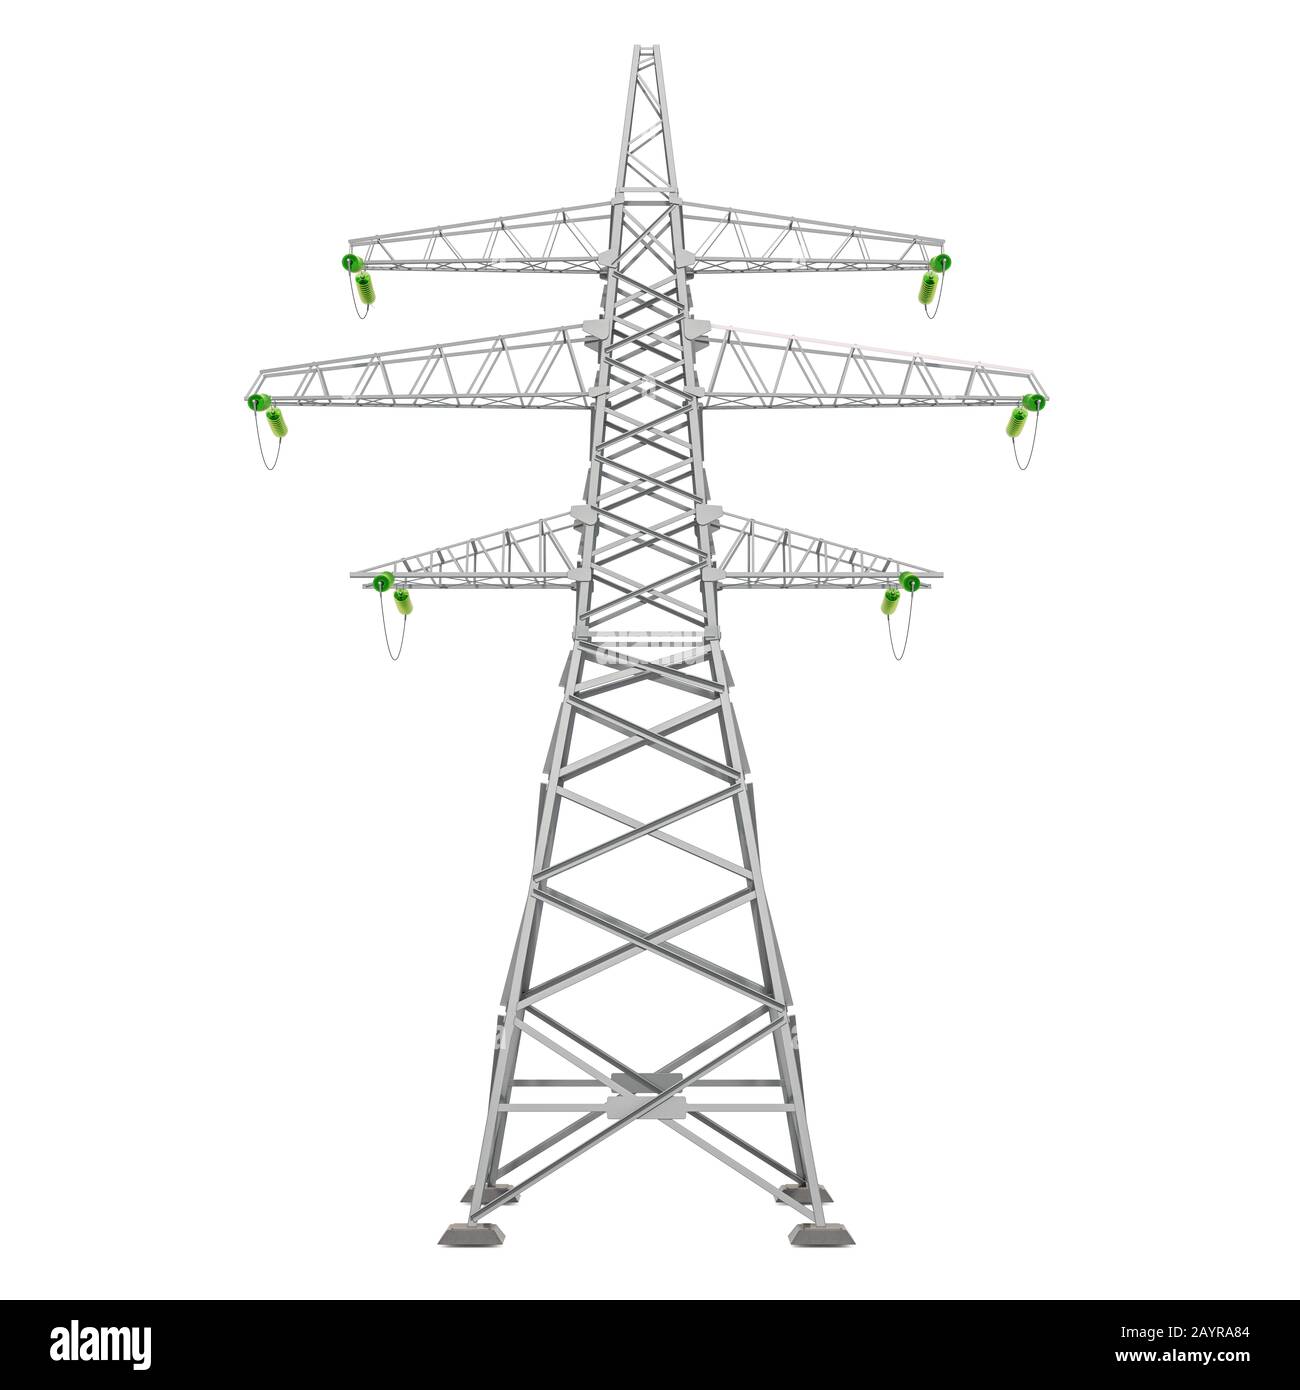 Transmission tower, power tower. 3D rendering isolated on white background Stock Photo